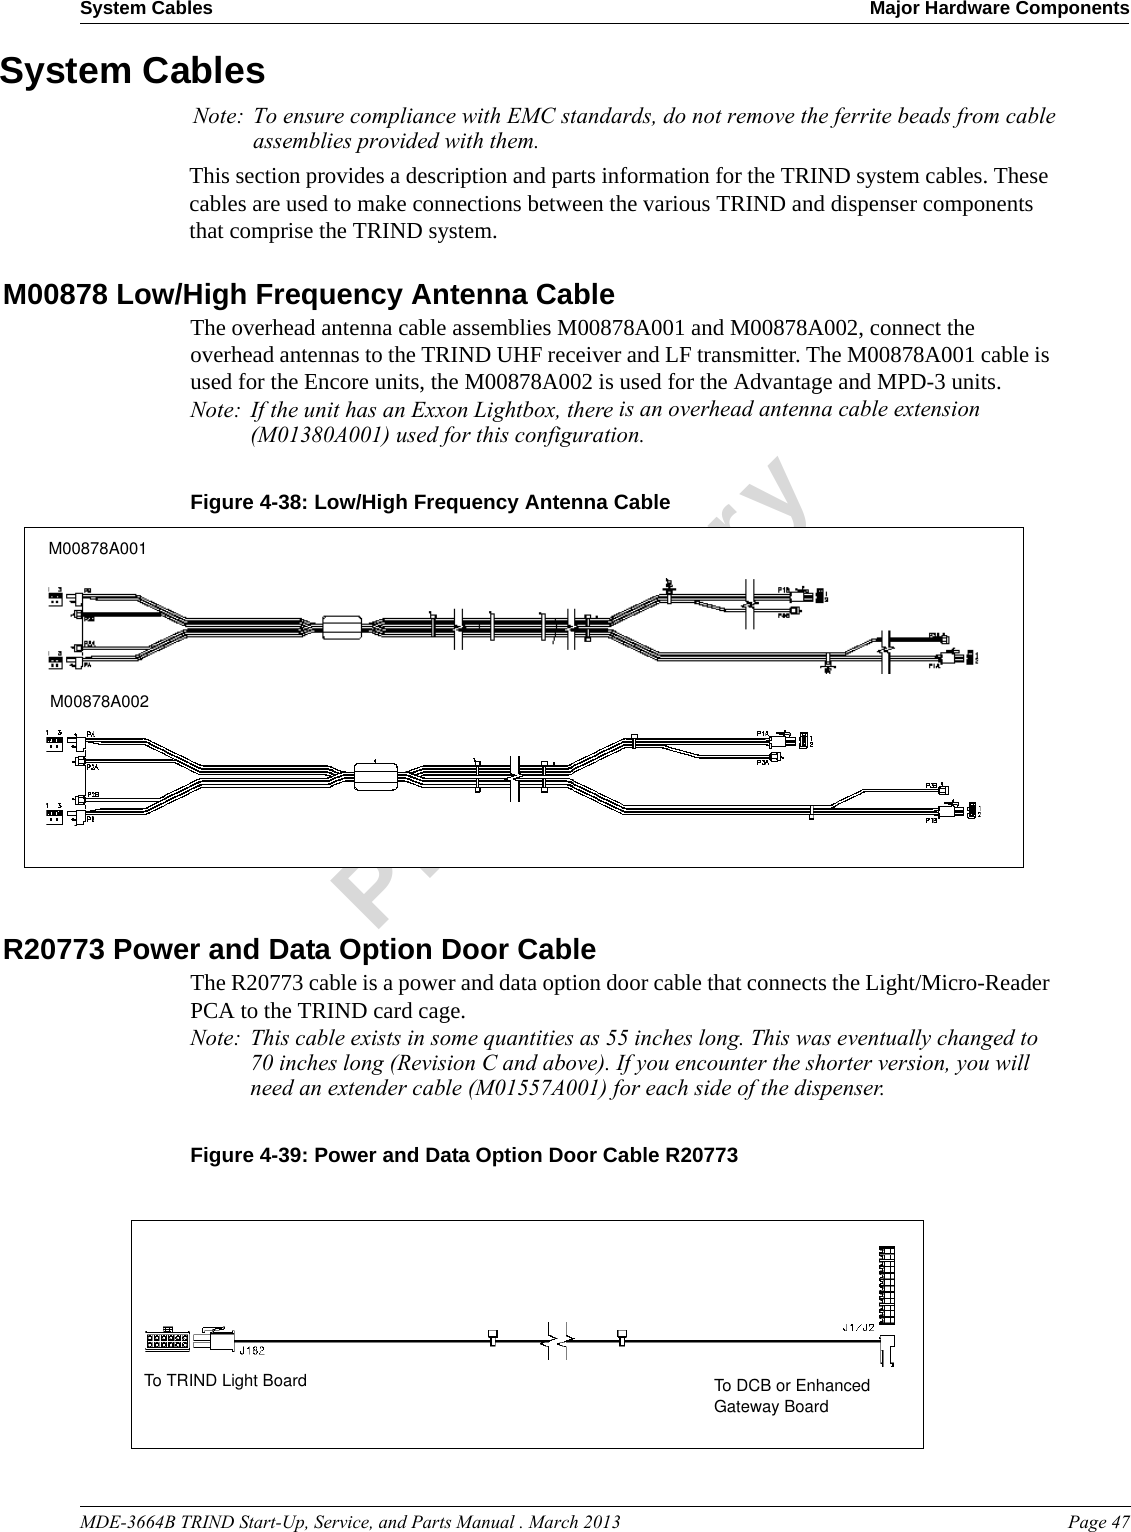 MDE-3664B TRIND Start-Up, Service, and Parts Manual . March 2013 Page 47System Cables Major Hardware ComponentsPreliminarySystem CablesThis section provides a description and parts information for the TRIND system cables. These cables are used to make connections between the various TRIND and dispenser components that comprise the TRIND system.M00878 Low/High Frequency Antenna CableThe overhead antenna cable assemblies M00878A001 and M00878A002, connect the overhead antennas to the TRIND UHF receiver and LF transmitter. The M00878A001 cable is used for the Encore units, the M00878A002 is used for the Advantage and MPD-3 units. Note: If the unit has an Exxon Lightbox, there is an overhead antenna cable extension (M01380A001) used for this configuration.Figure 4-38: M00878A001M00878A002Low/High Frequency Antenna CableR20773 Power and Data Option Door Cable The R20773 cable is a power and data option door cable that connects the Light/Micro-Reader PCA to the TRIND card cage. Note: This cable exists in some quantities as 55 inches long. This was eventually changed to 70 inches long (Revision C and above). If you encounter the shorter version, you will need an extender cable (M01557A001) for each side of the dispenser. Figure 4-39: Power and Data Option Door Cable R20773To DCB or Enhanced Gateway BoardTo TRIND Light BoardNote: To ensure compliance with EMC standards, do not remove the ferrite beads from cable assemblies provided with them.